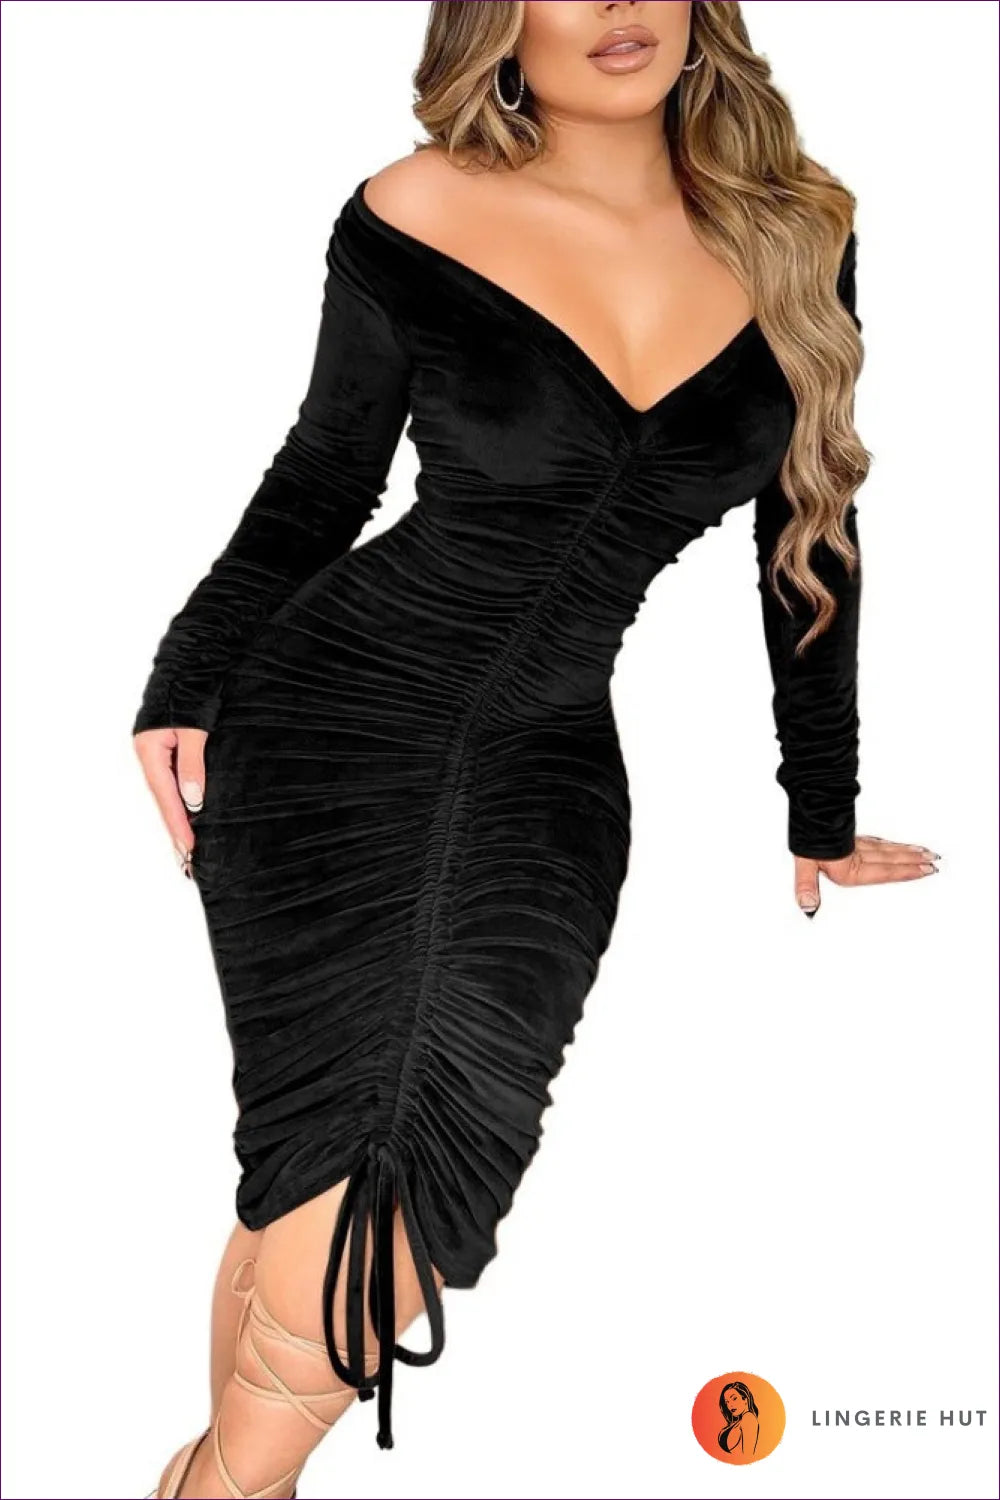 Be The Queen Of Night In Our Elegant Enigma Bodycon Dress! Perfect For Parties & Clubs. Sexy, Chic Utterly